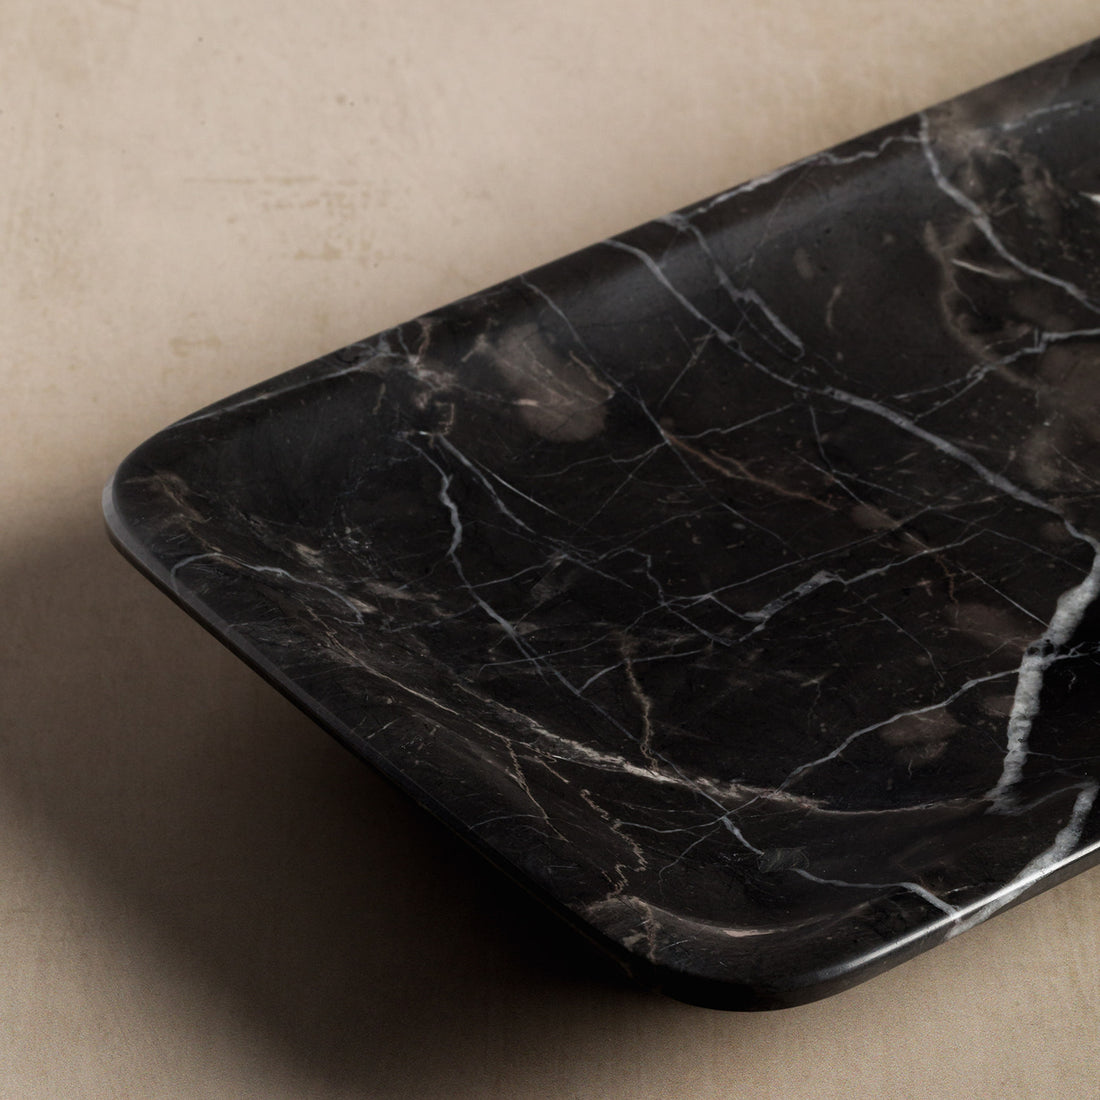 Luxury stone tray for home decor made from black marble